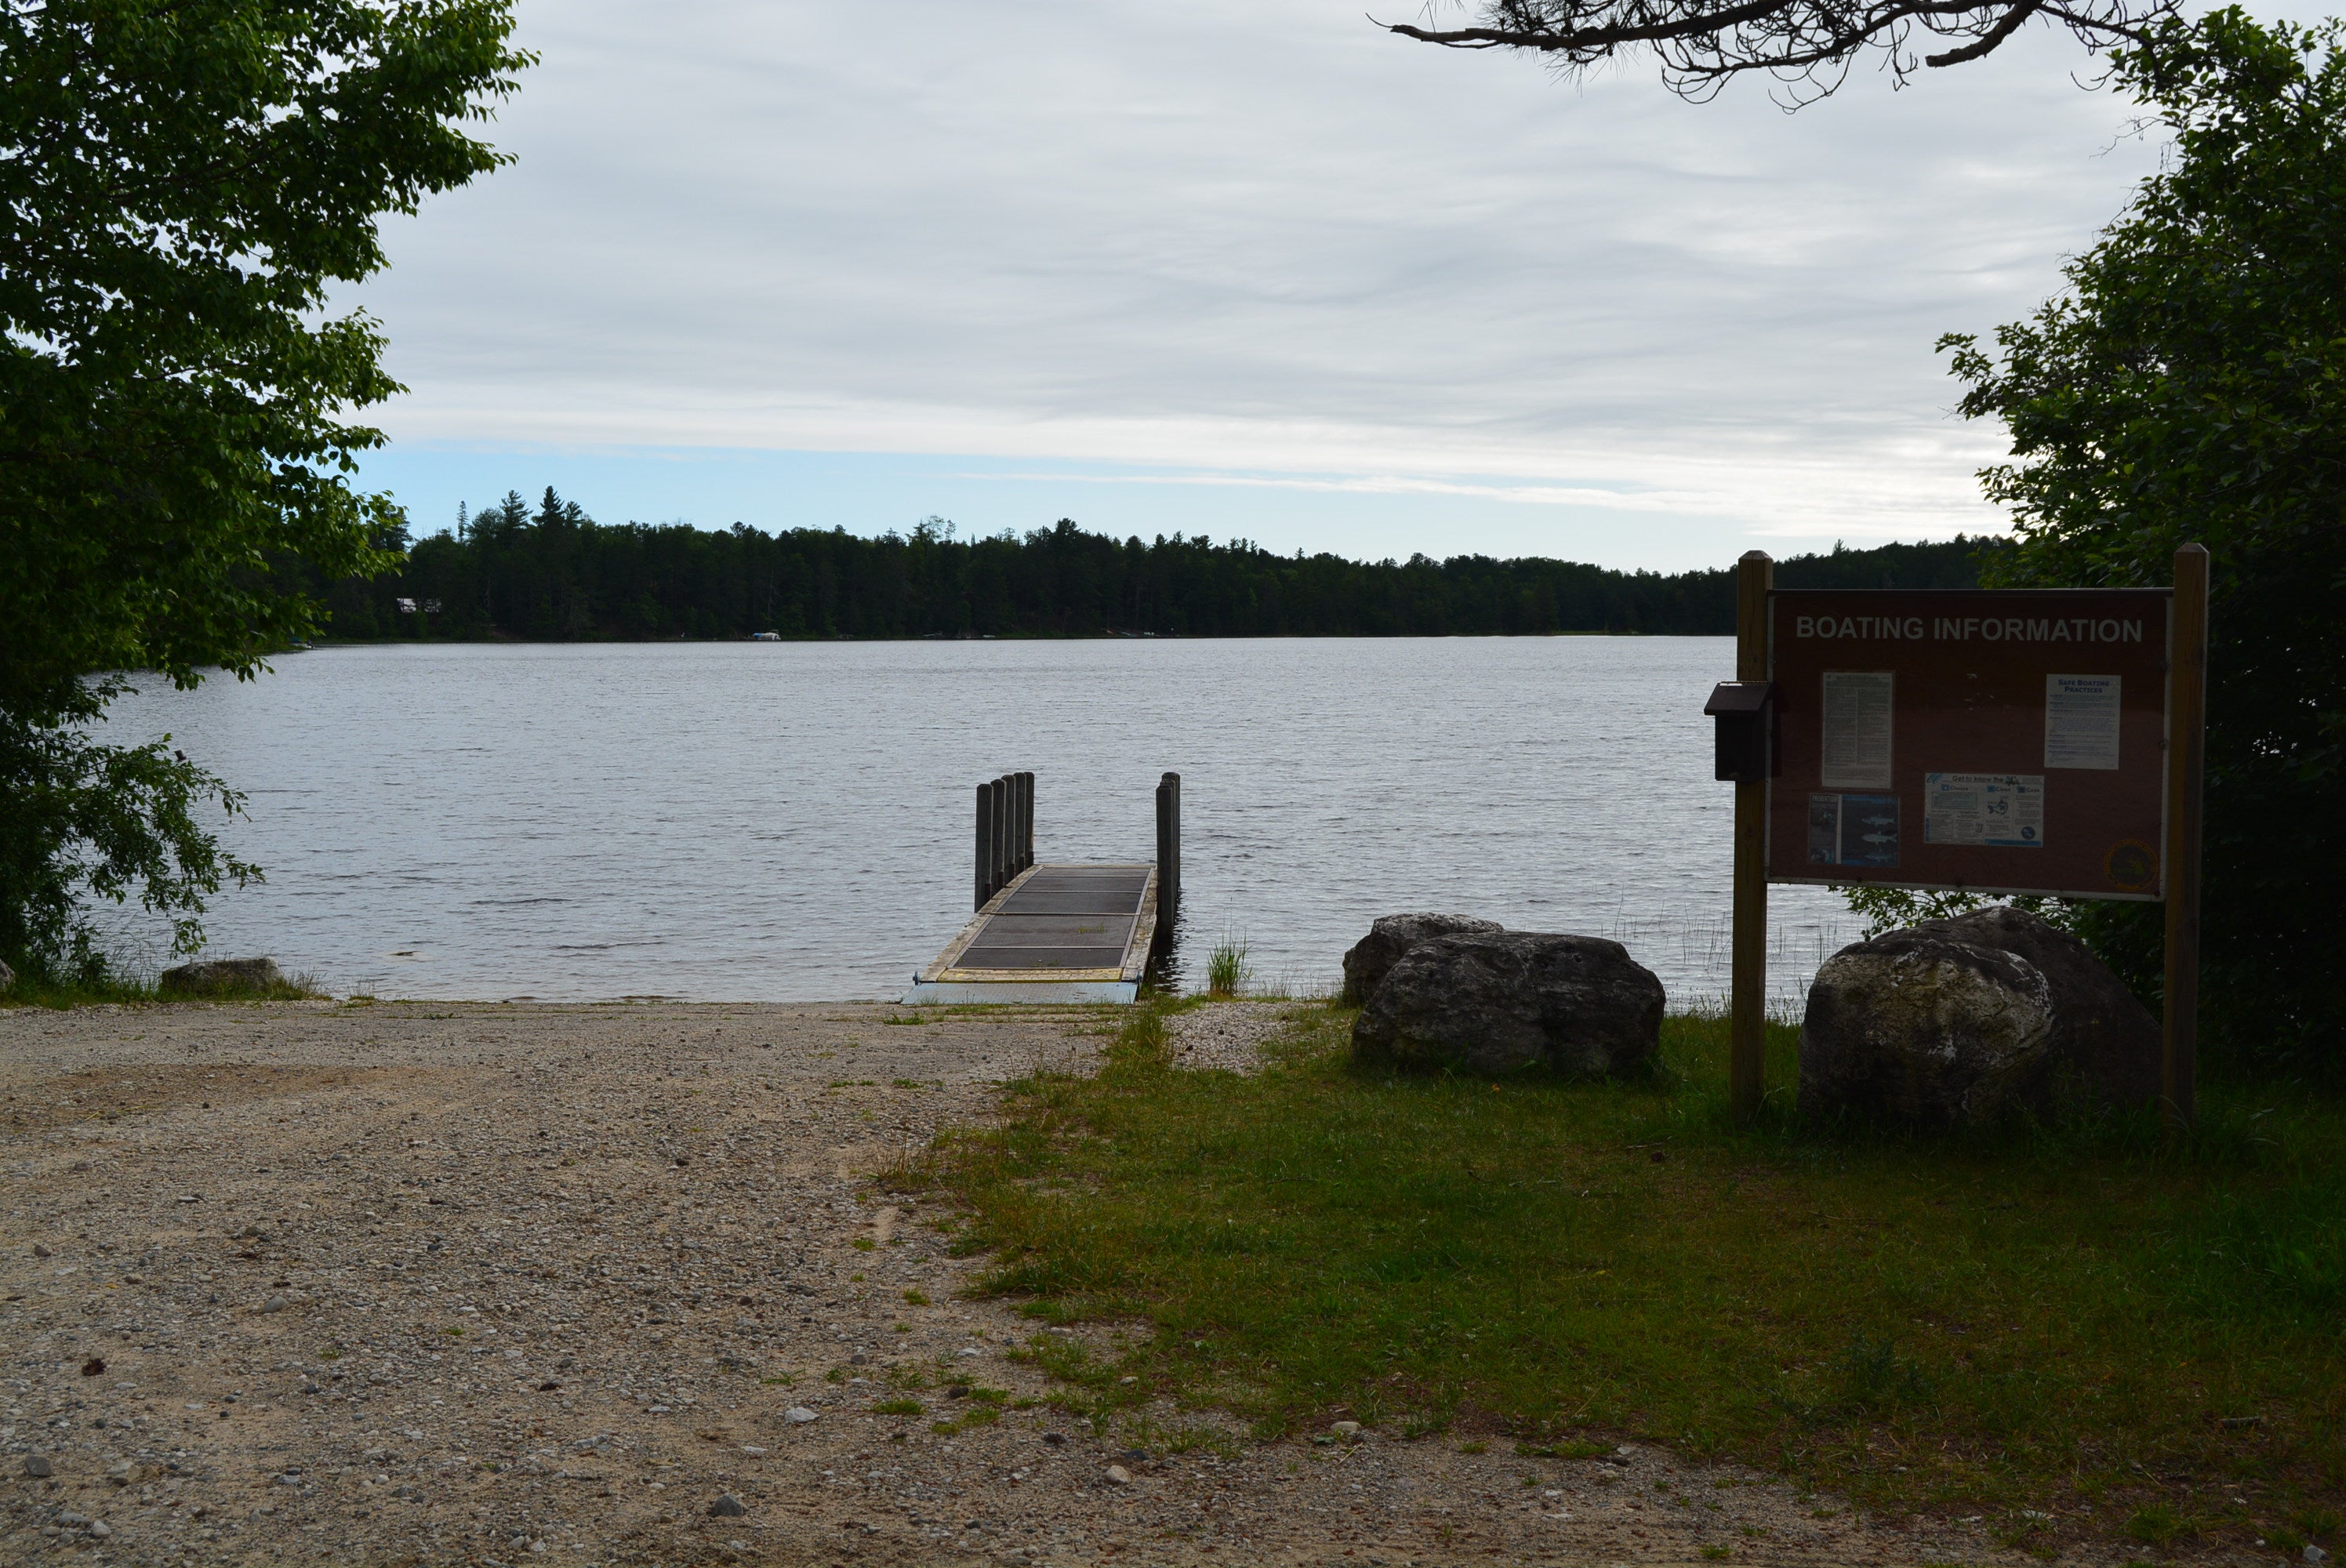 Boat launch is perfect for paddle craft or small boats.  